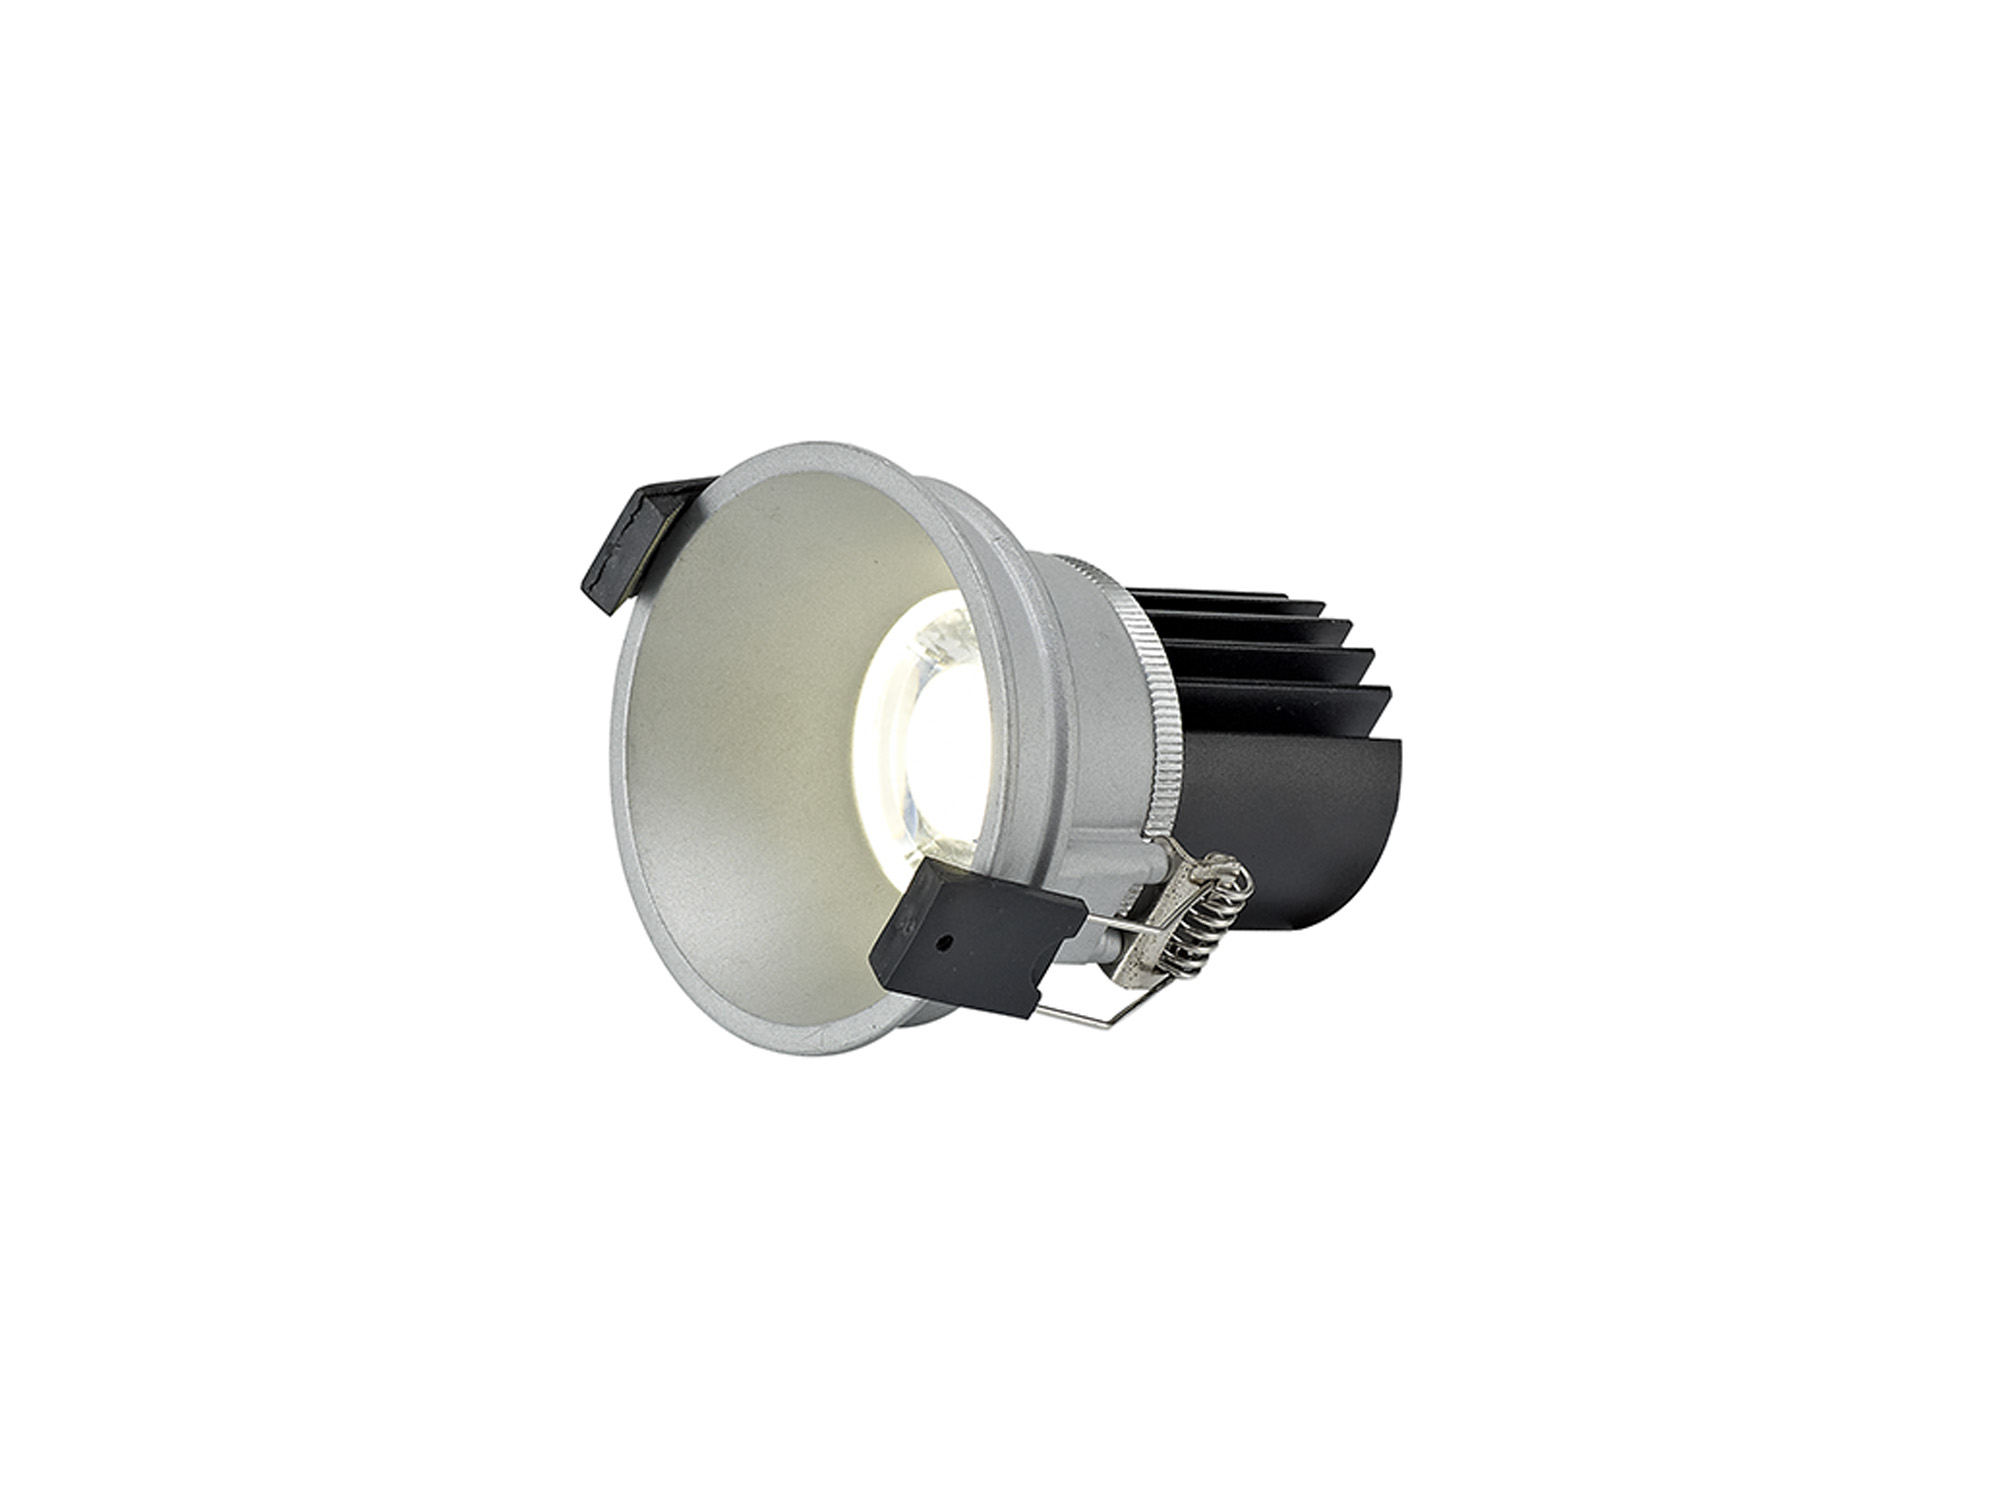 DM201640  Bania 9 Powered by Tridonic  9W 2700K 770lm 24° CRI>90 LED Engine; 250mA Silver Fixed Recessed Spotlight; IP20